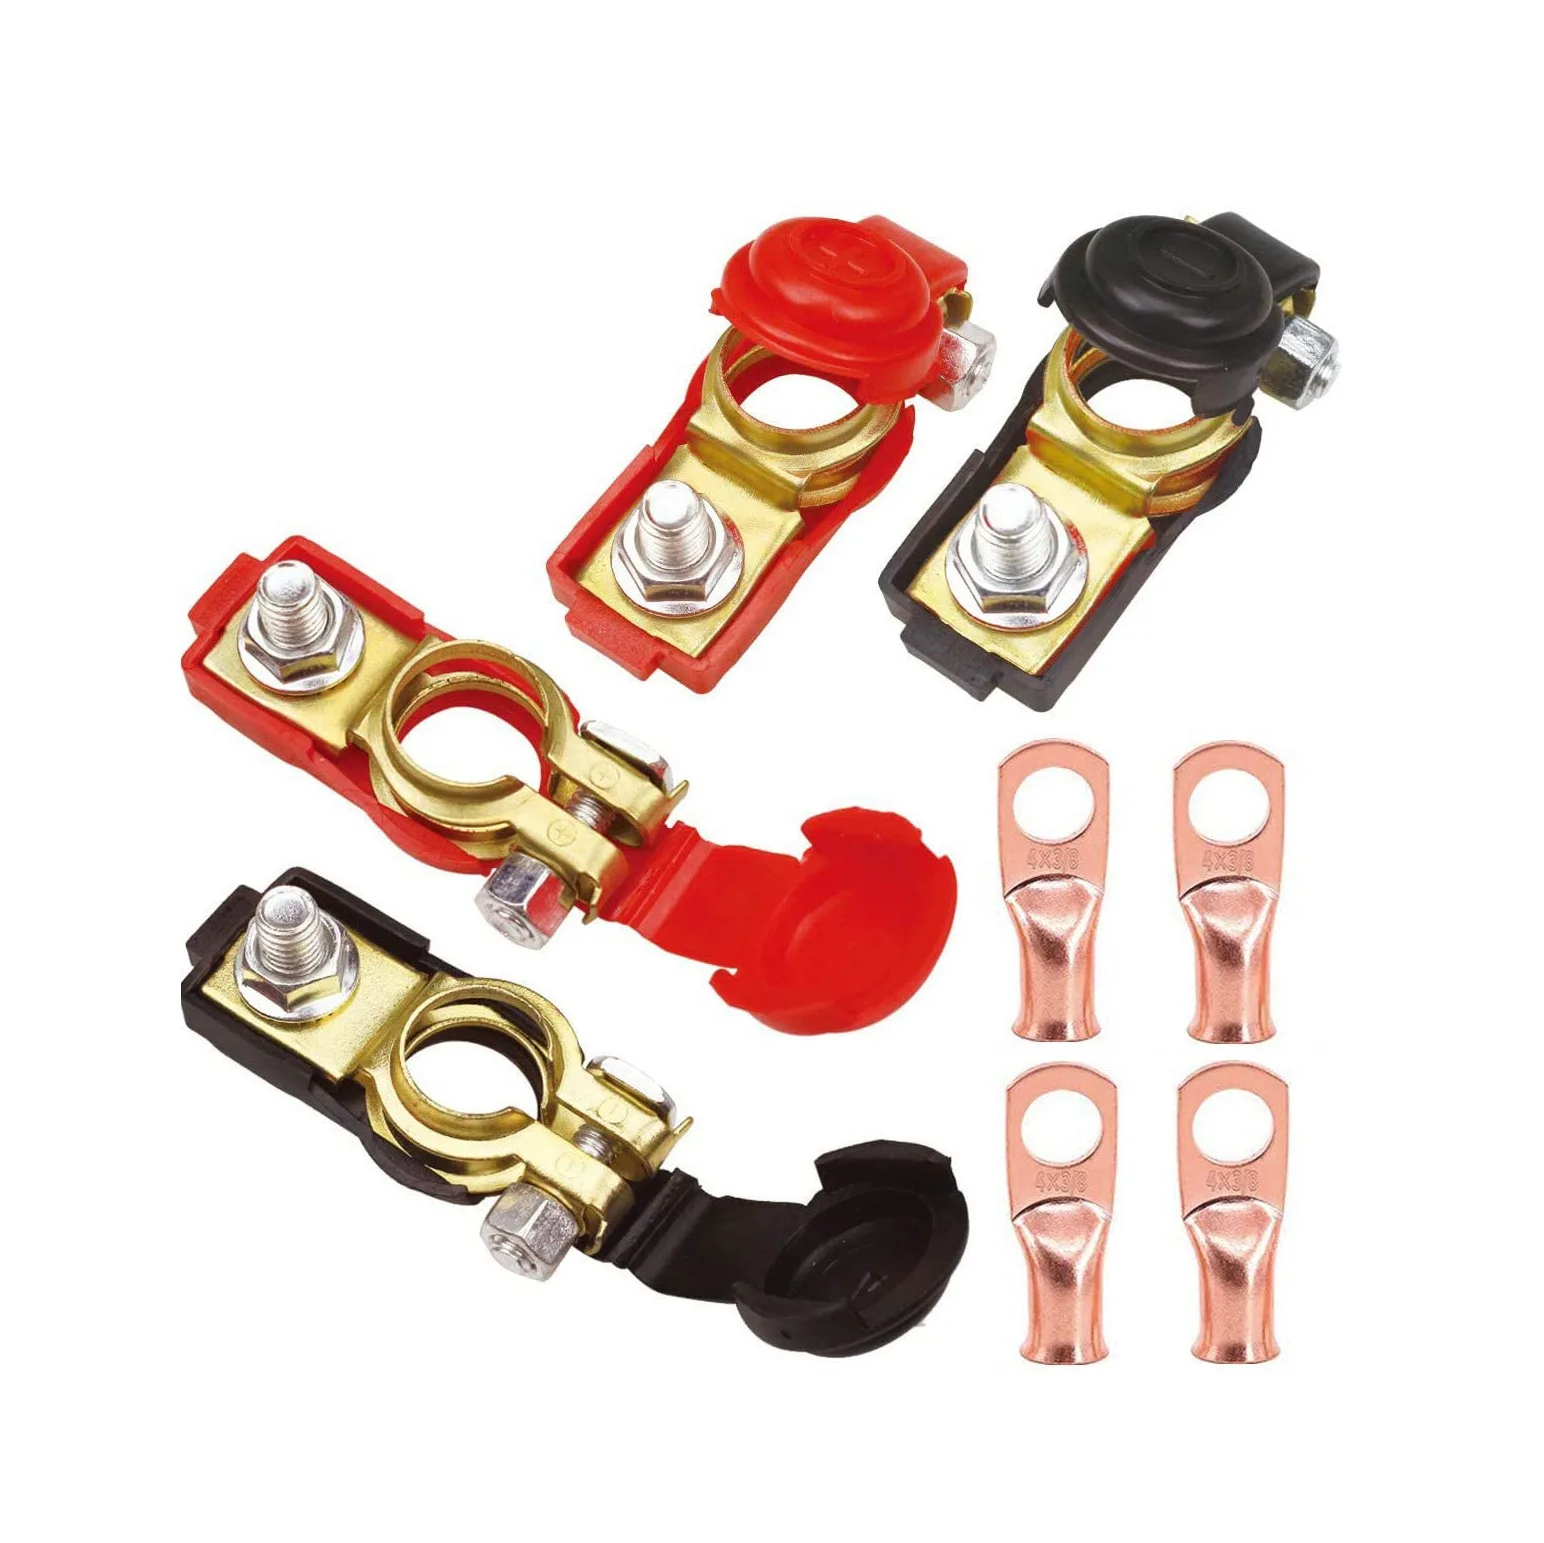 

Battery Cable Terminal Clamp Connector for Car Trunk RV Ship Truck Camper All Terrain Vehicle UTV Vehicle